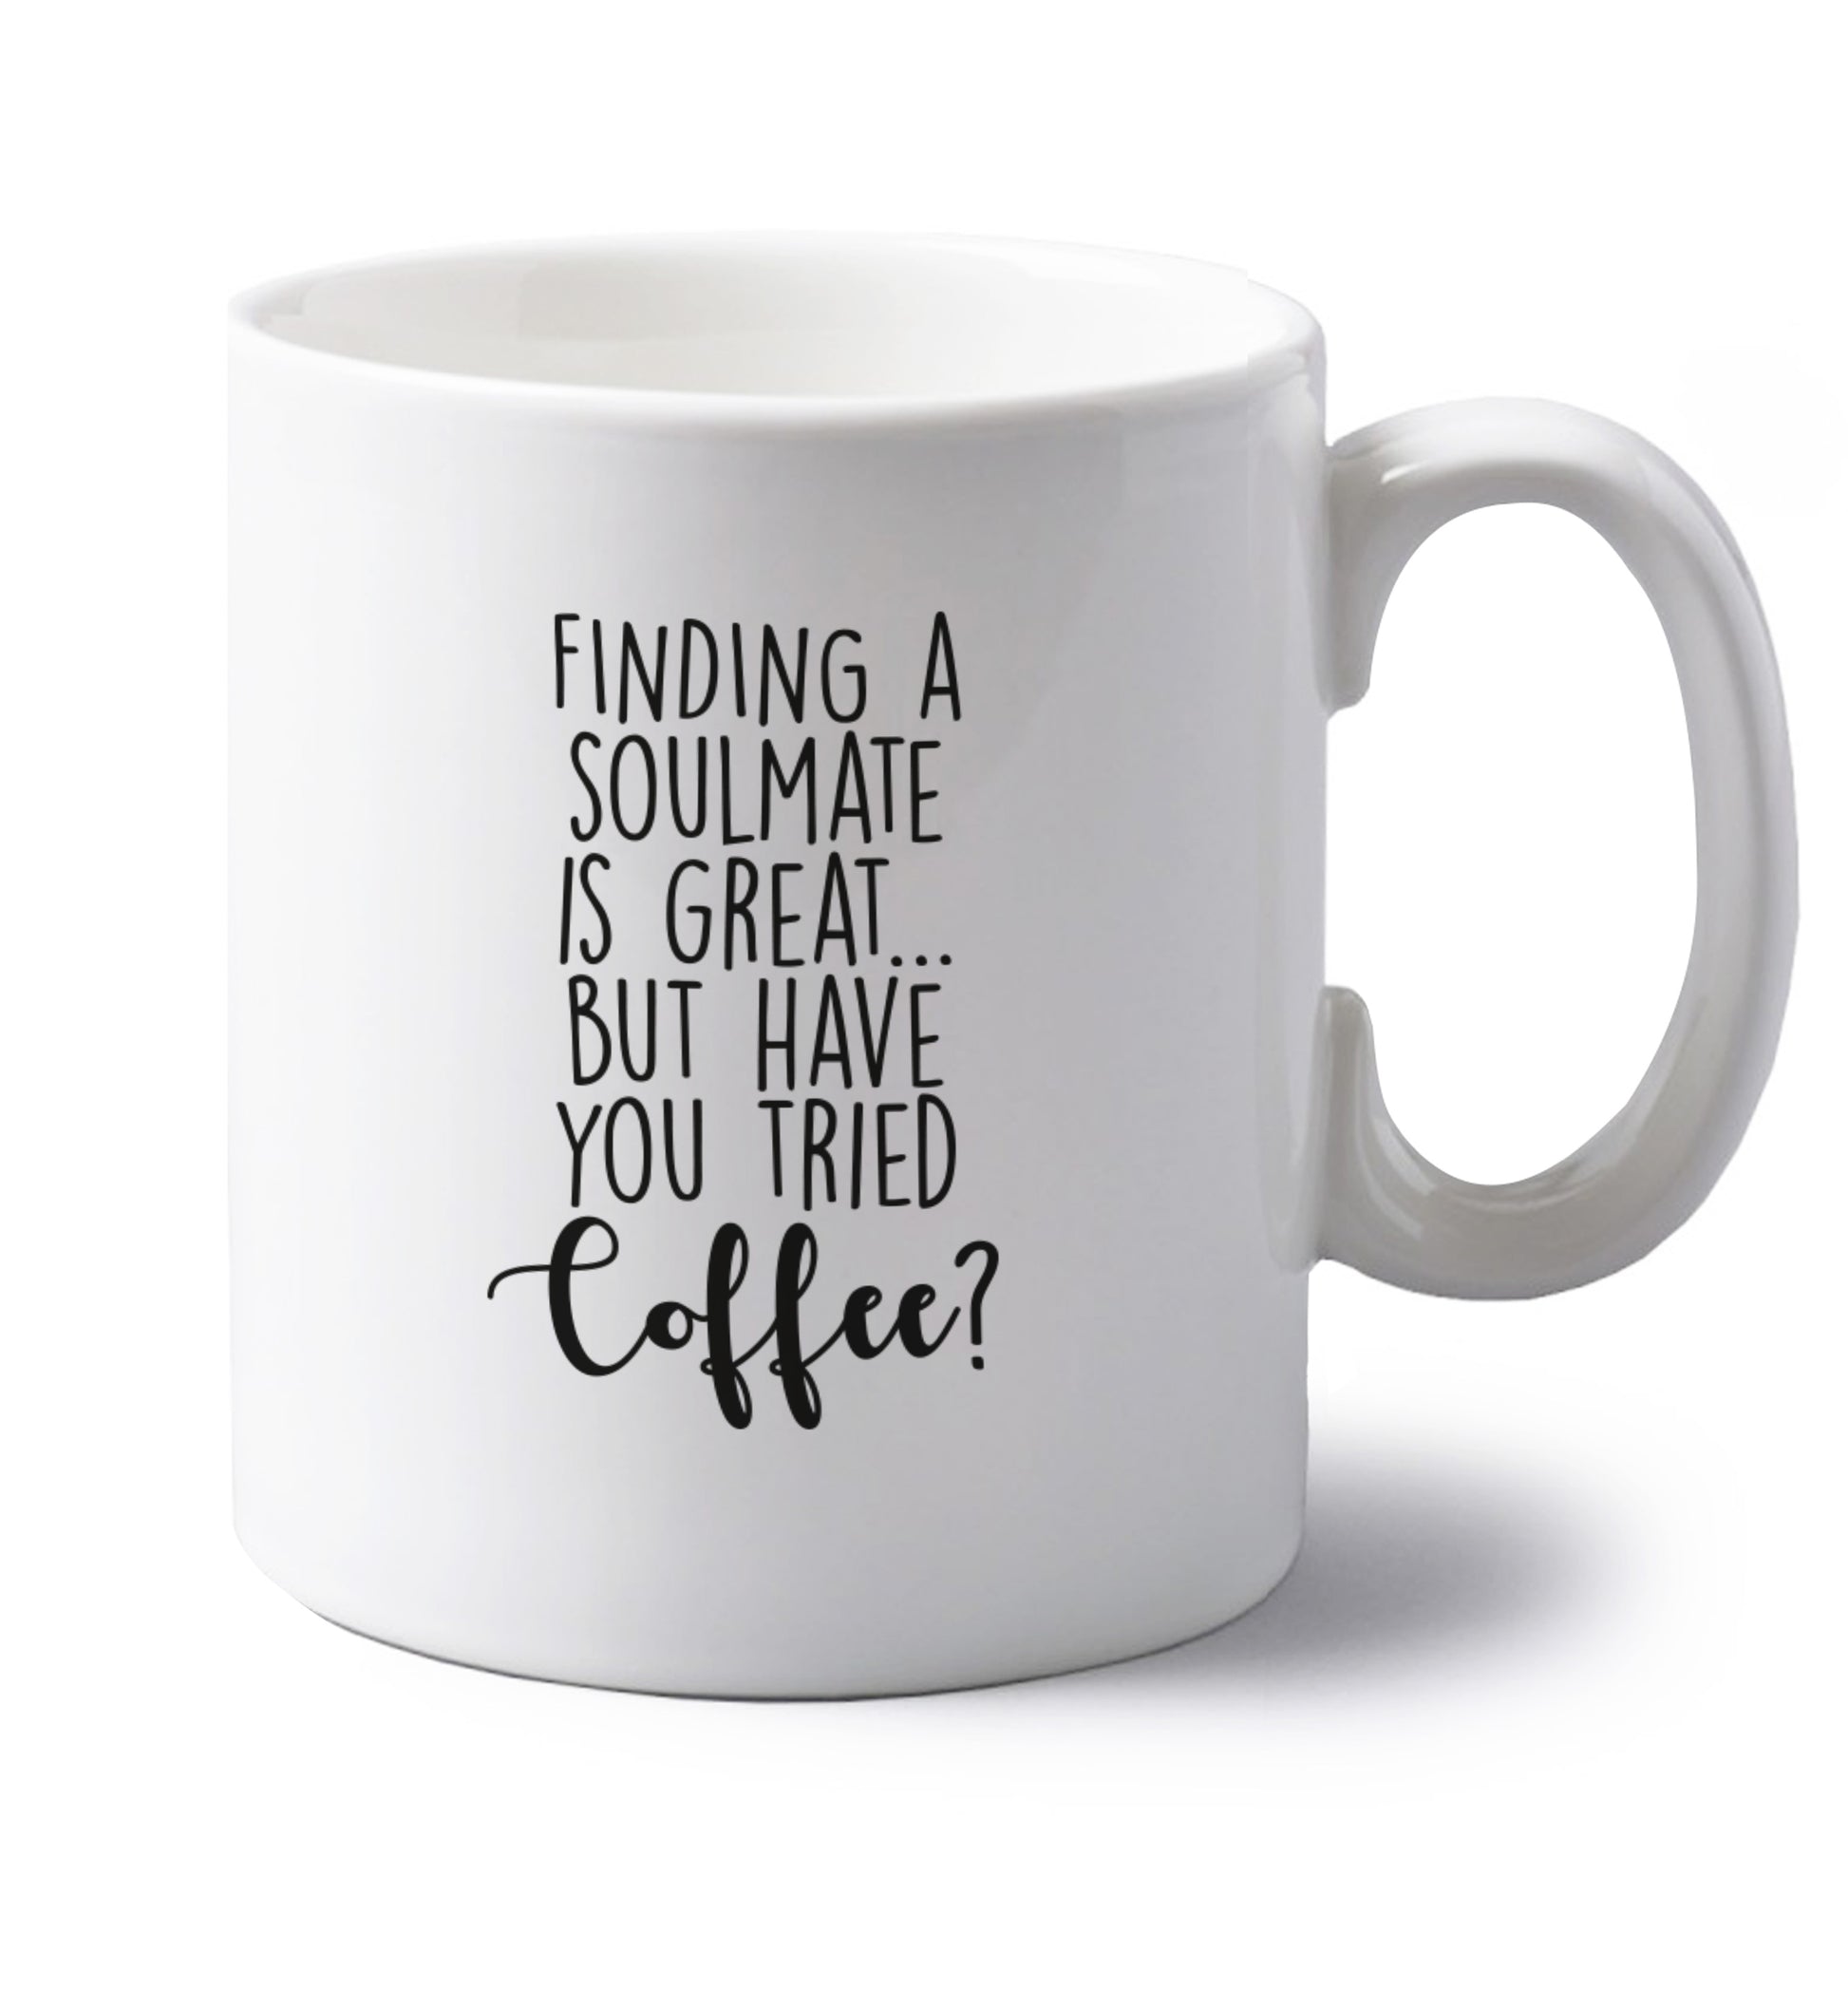 Finding a soulmate is great but have you tried coffee? left handed white ceramic mug 